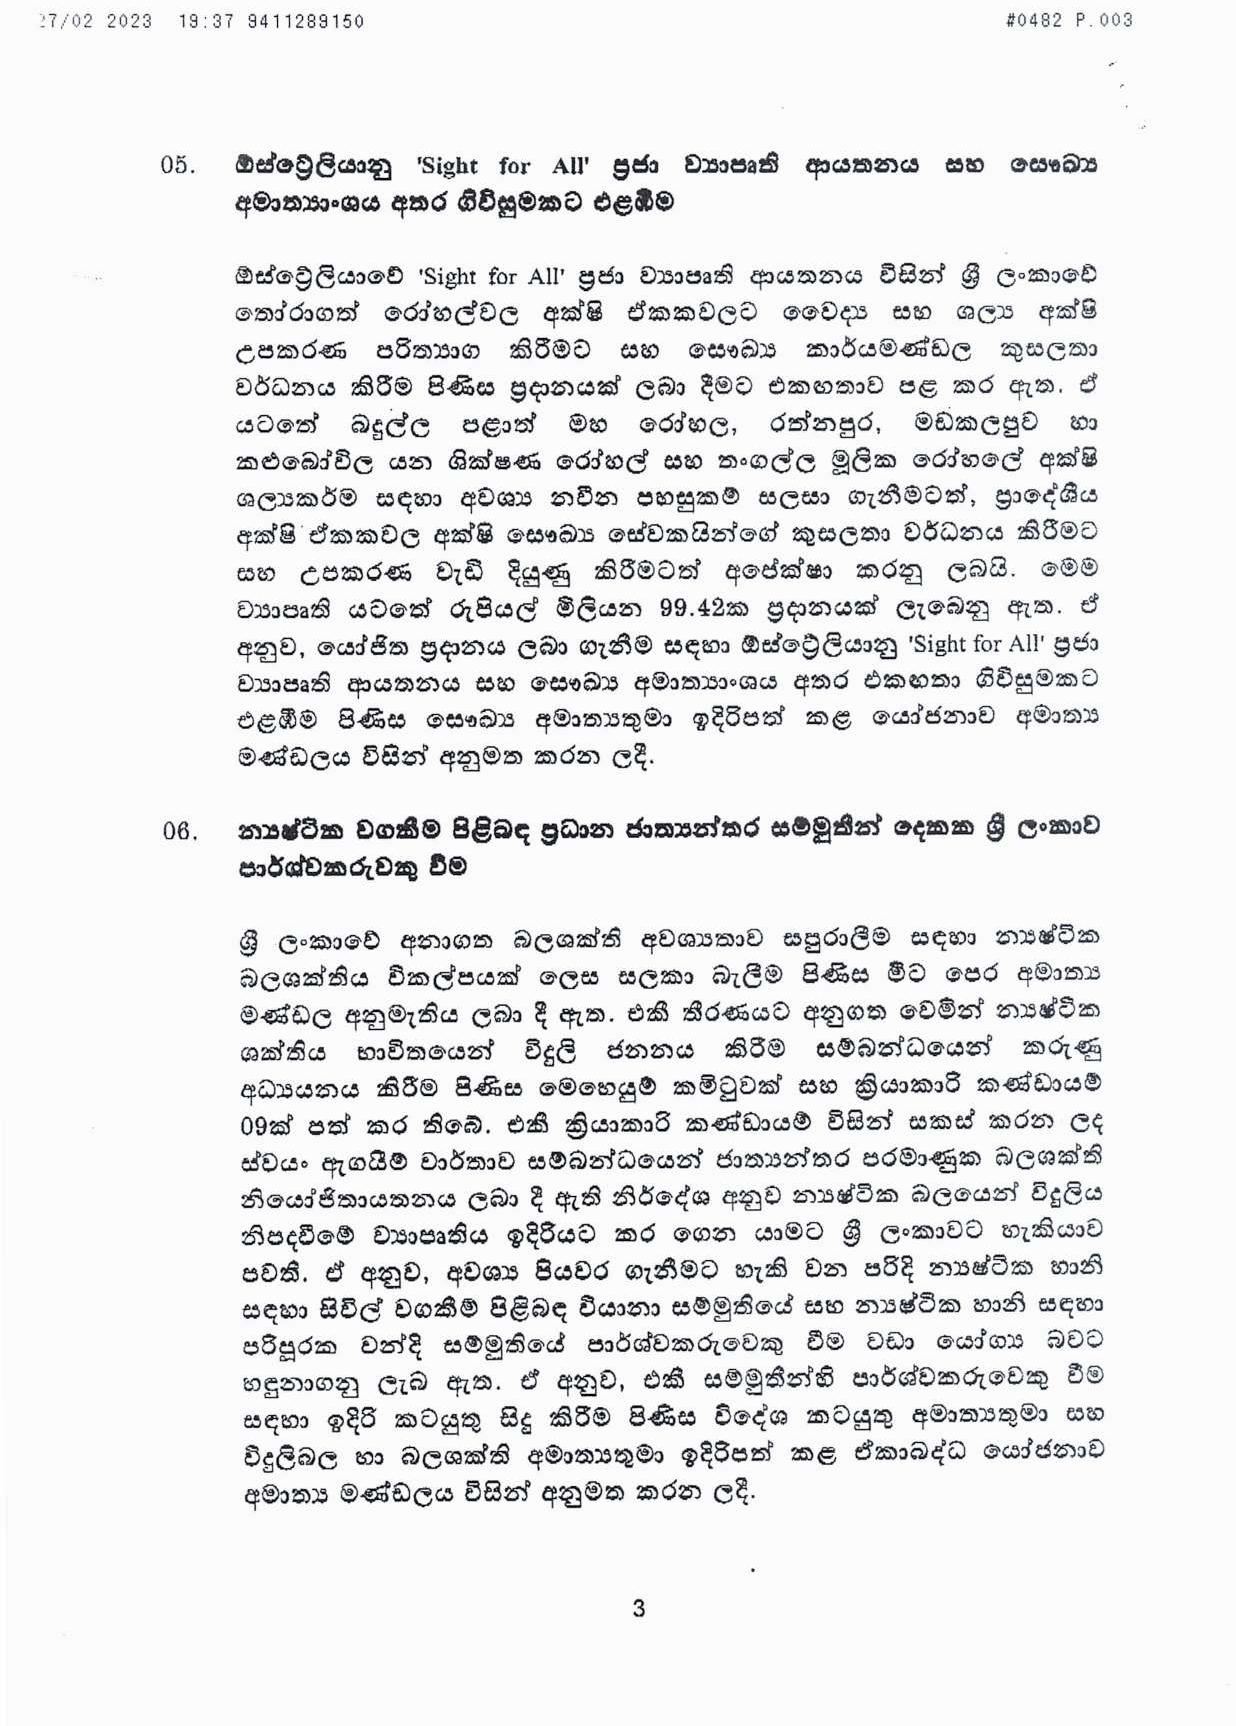 Cabinet Decision on 27.07.2023 page 003